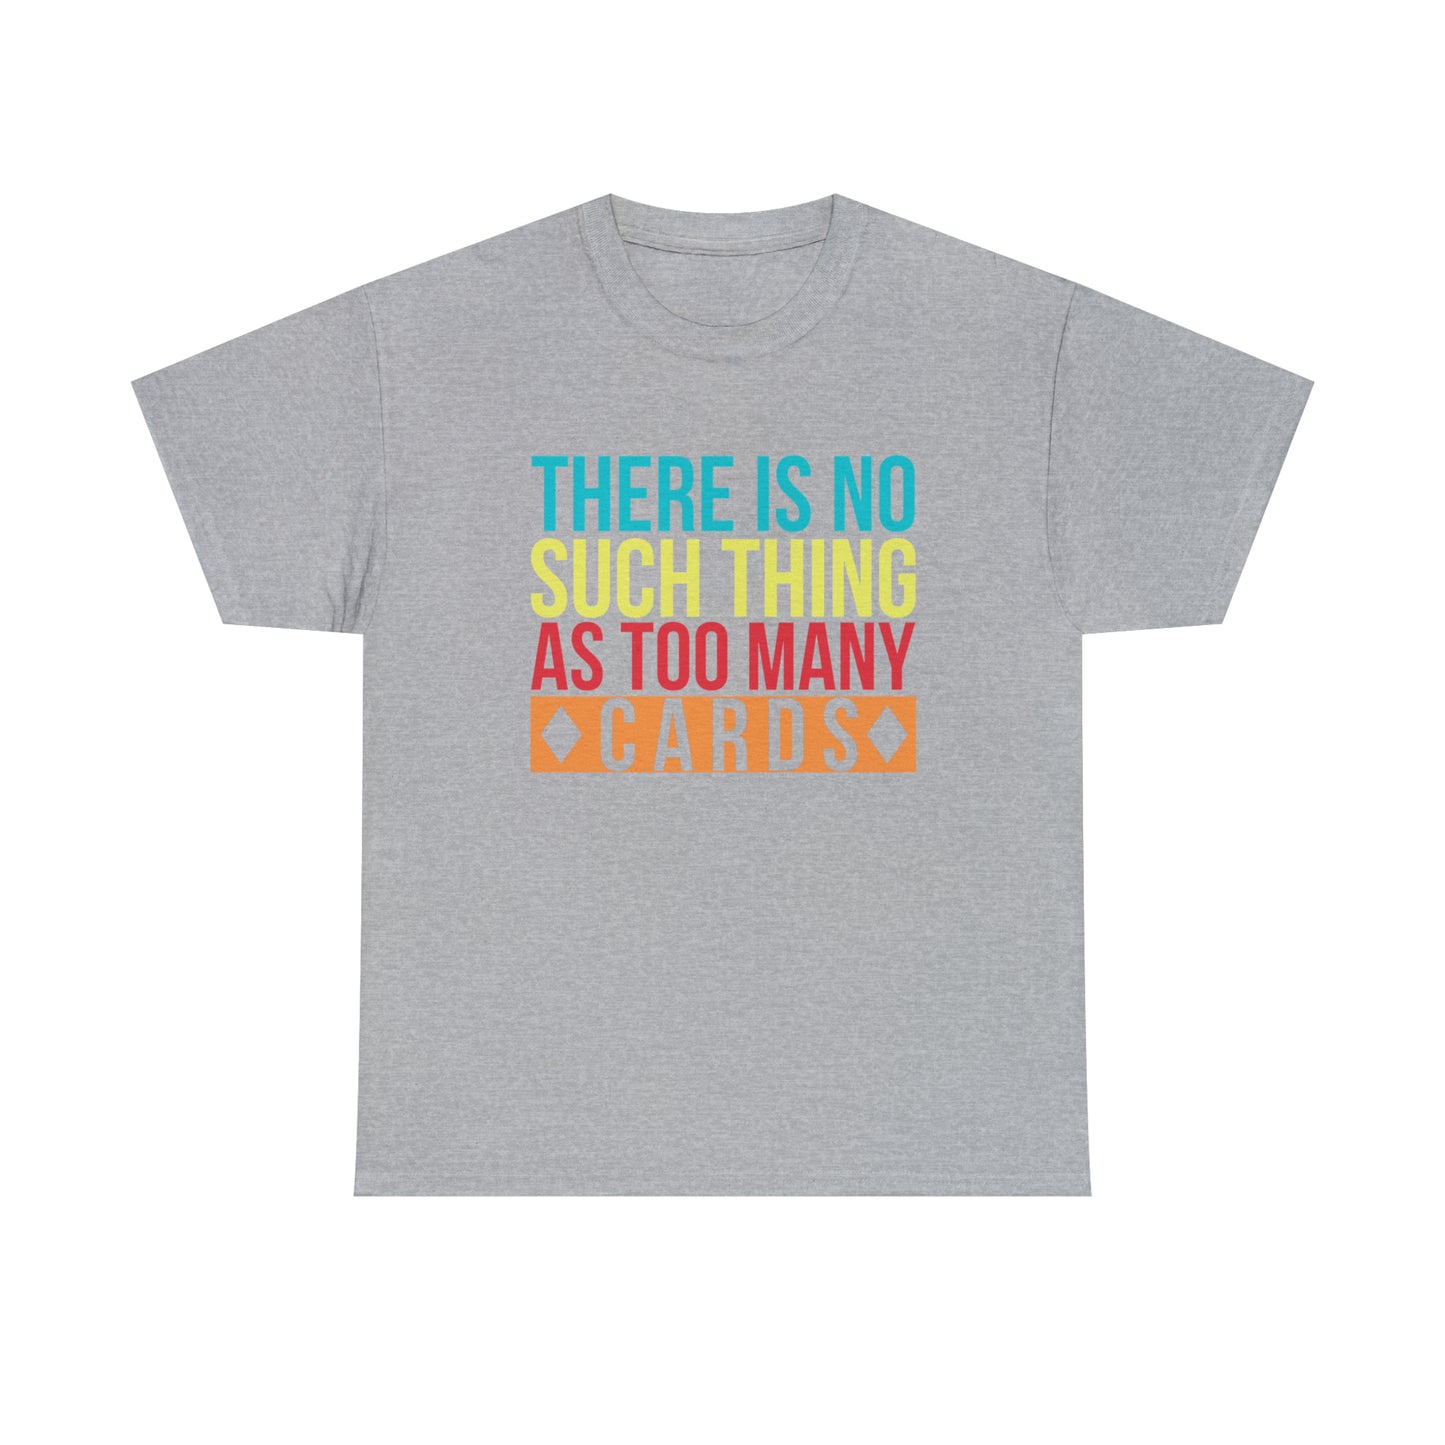 "There Is No Such Thing as Too Many Cards!" - Collector's Unisex Cotton Tee